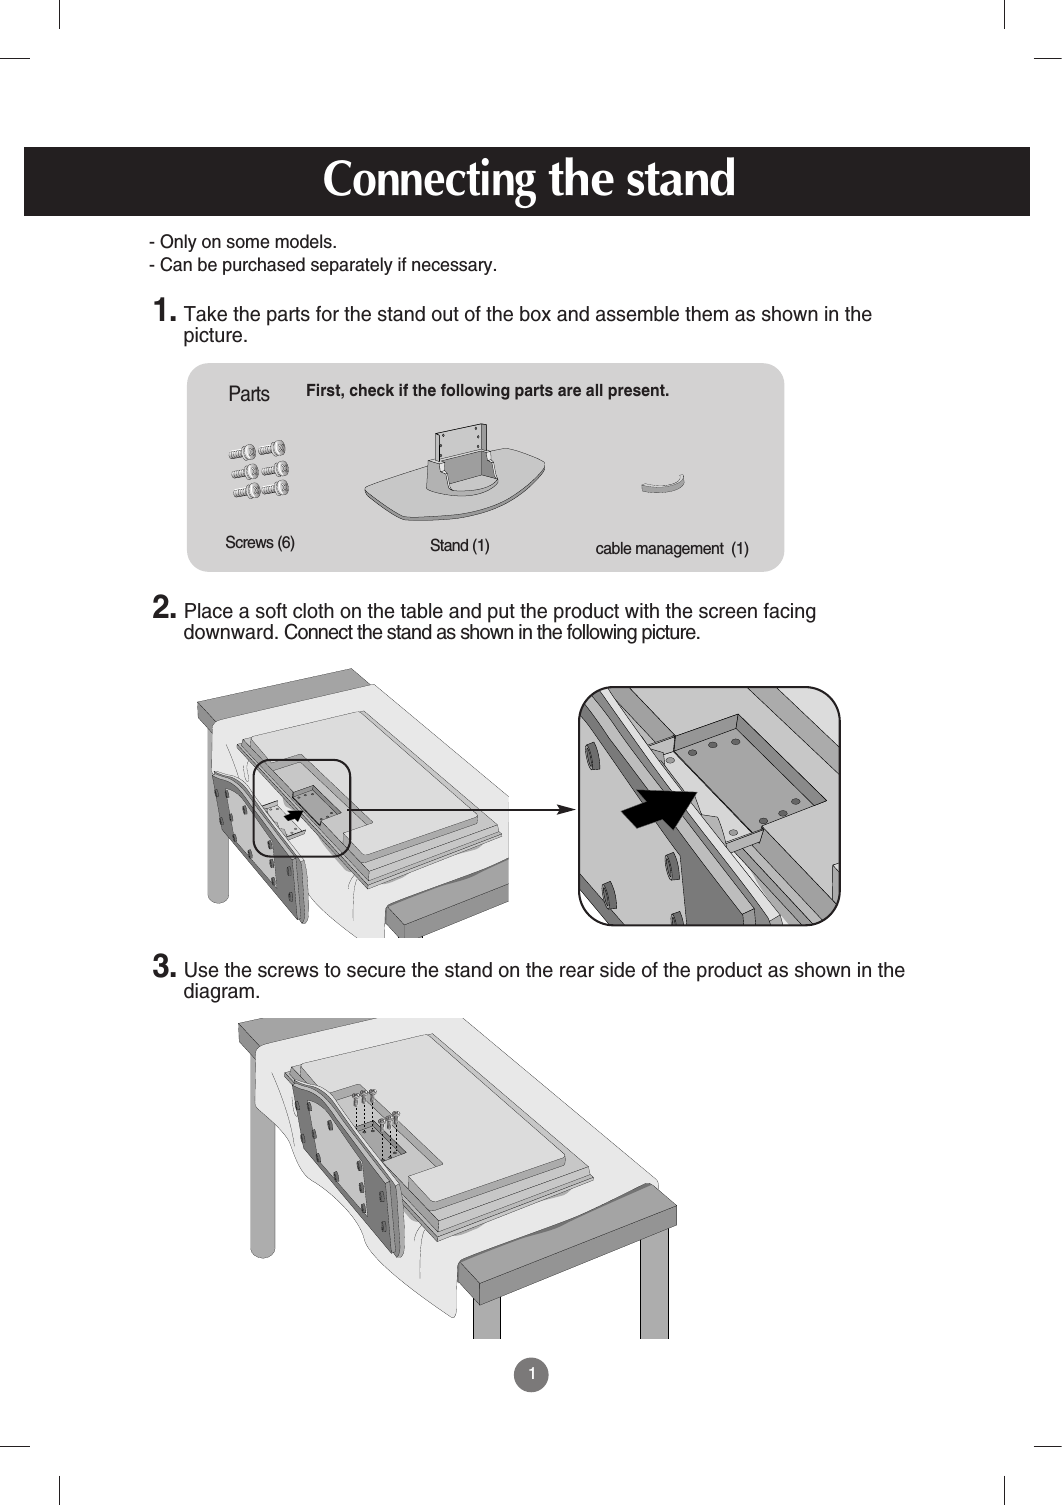 1First, check if the following parts are all present.Stand (1)Screws (6)Parts 1. Take the parts for the stand out of the box and assemble them as shown in thepicture.2. Place a soft cloth on the table and put the product with the screen facingdownward. Connect the stand as shown in the following picture.  cable management  (1)3. Use the screws to secure the stand on the rear side of the product as shown in thediagram.- Only on some models.- Can be purchased separately if necessary.Connectingthe stand